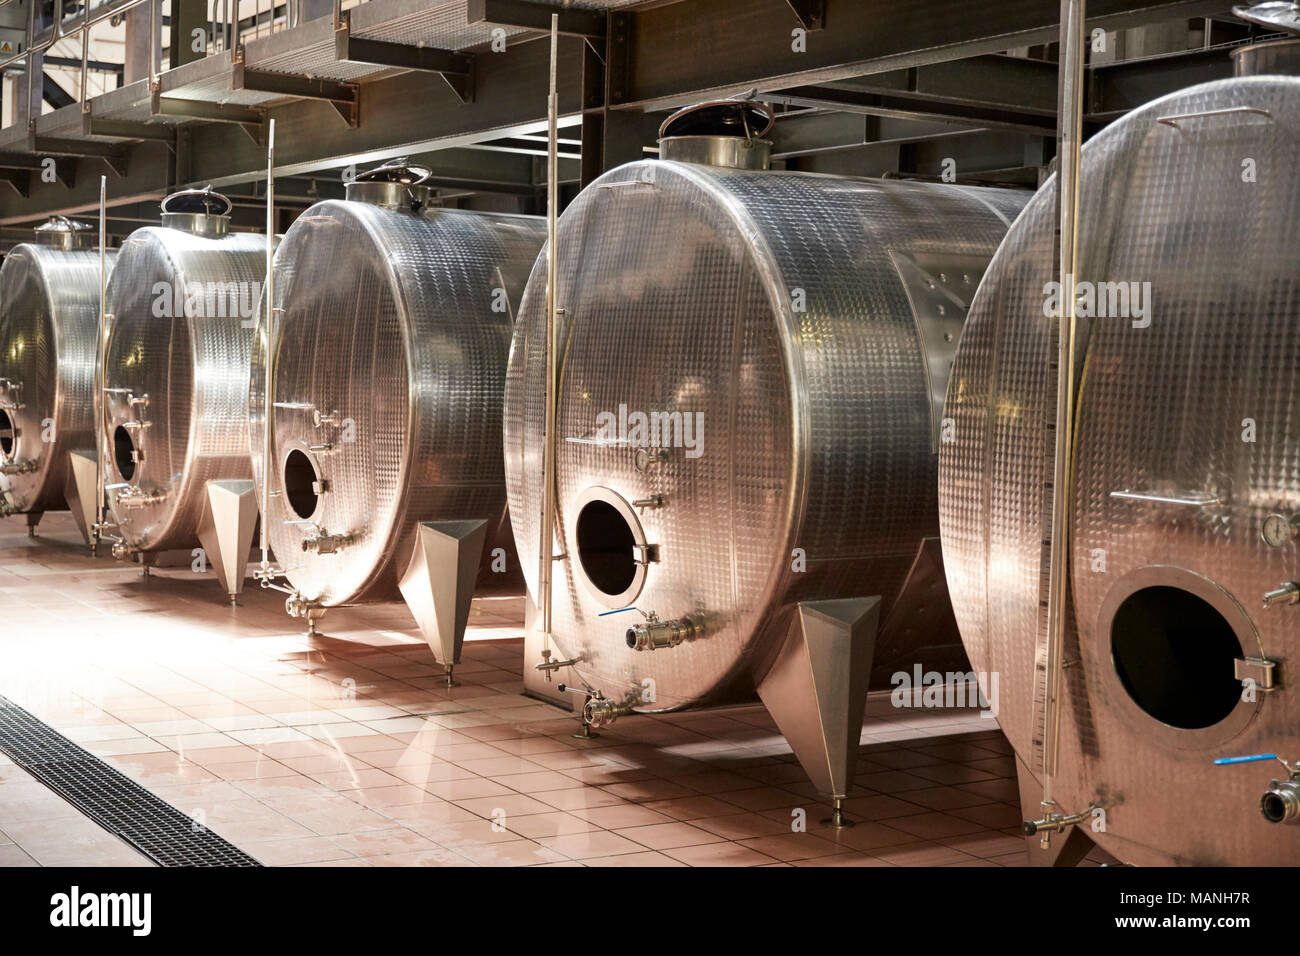 A row of metal vats in a modern winemaking facility Stock Photo